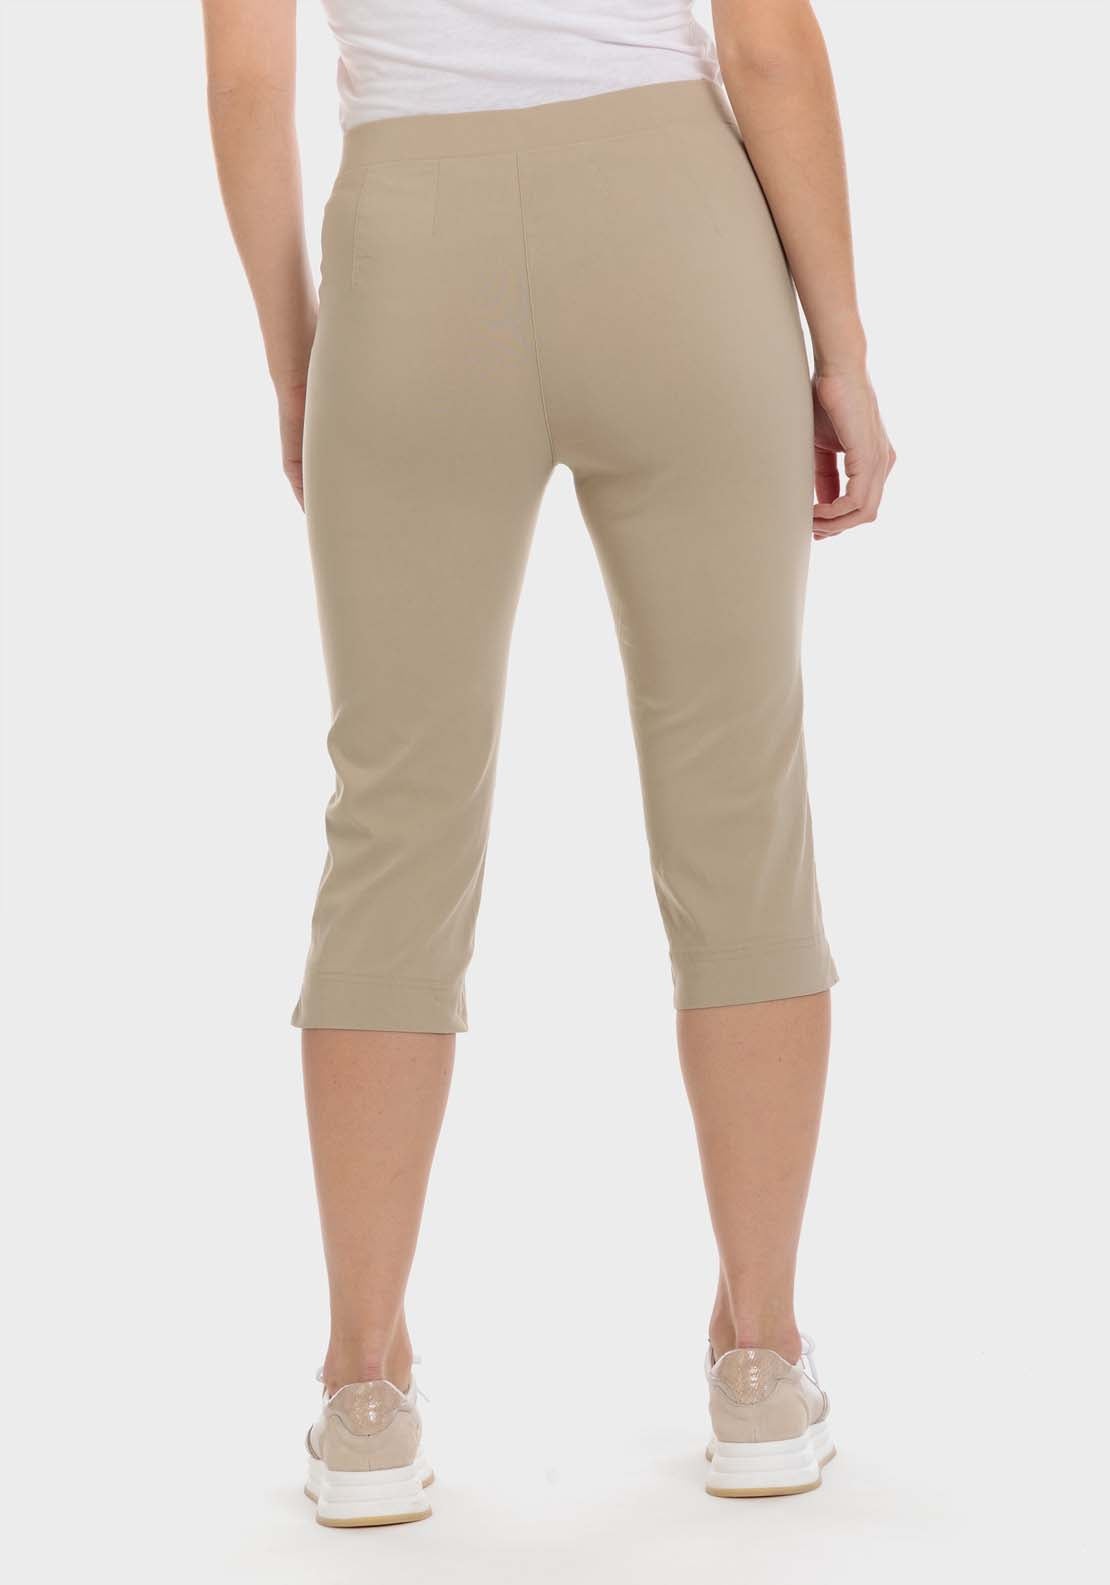 Punt Roma Bengaline Crop Trousers 2 Shaws Department Stores